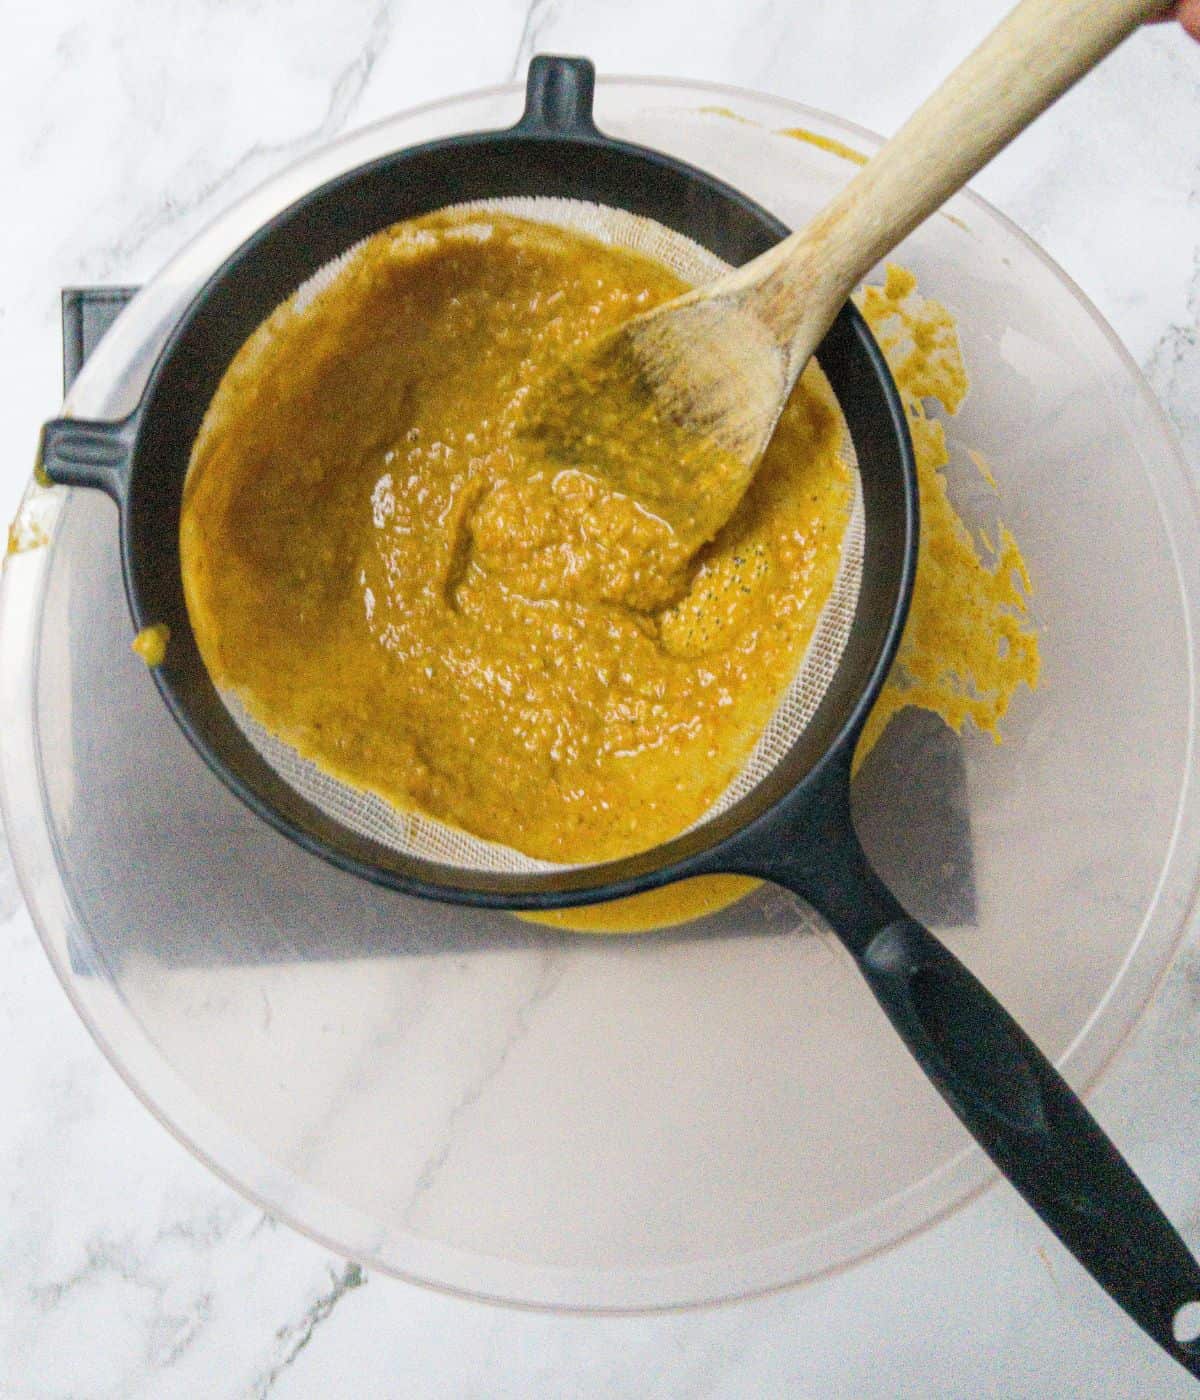 Katsu curry sauce being put through a sieve into a bowl to thin it.